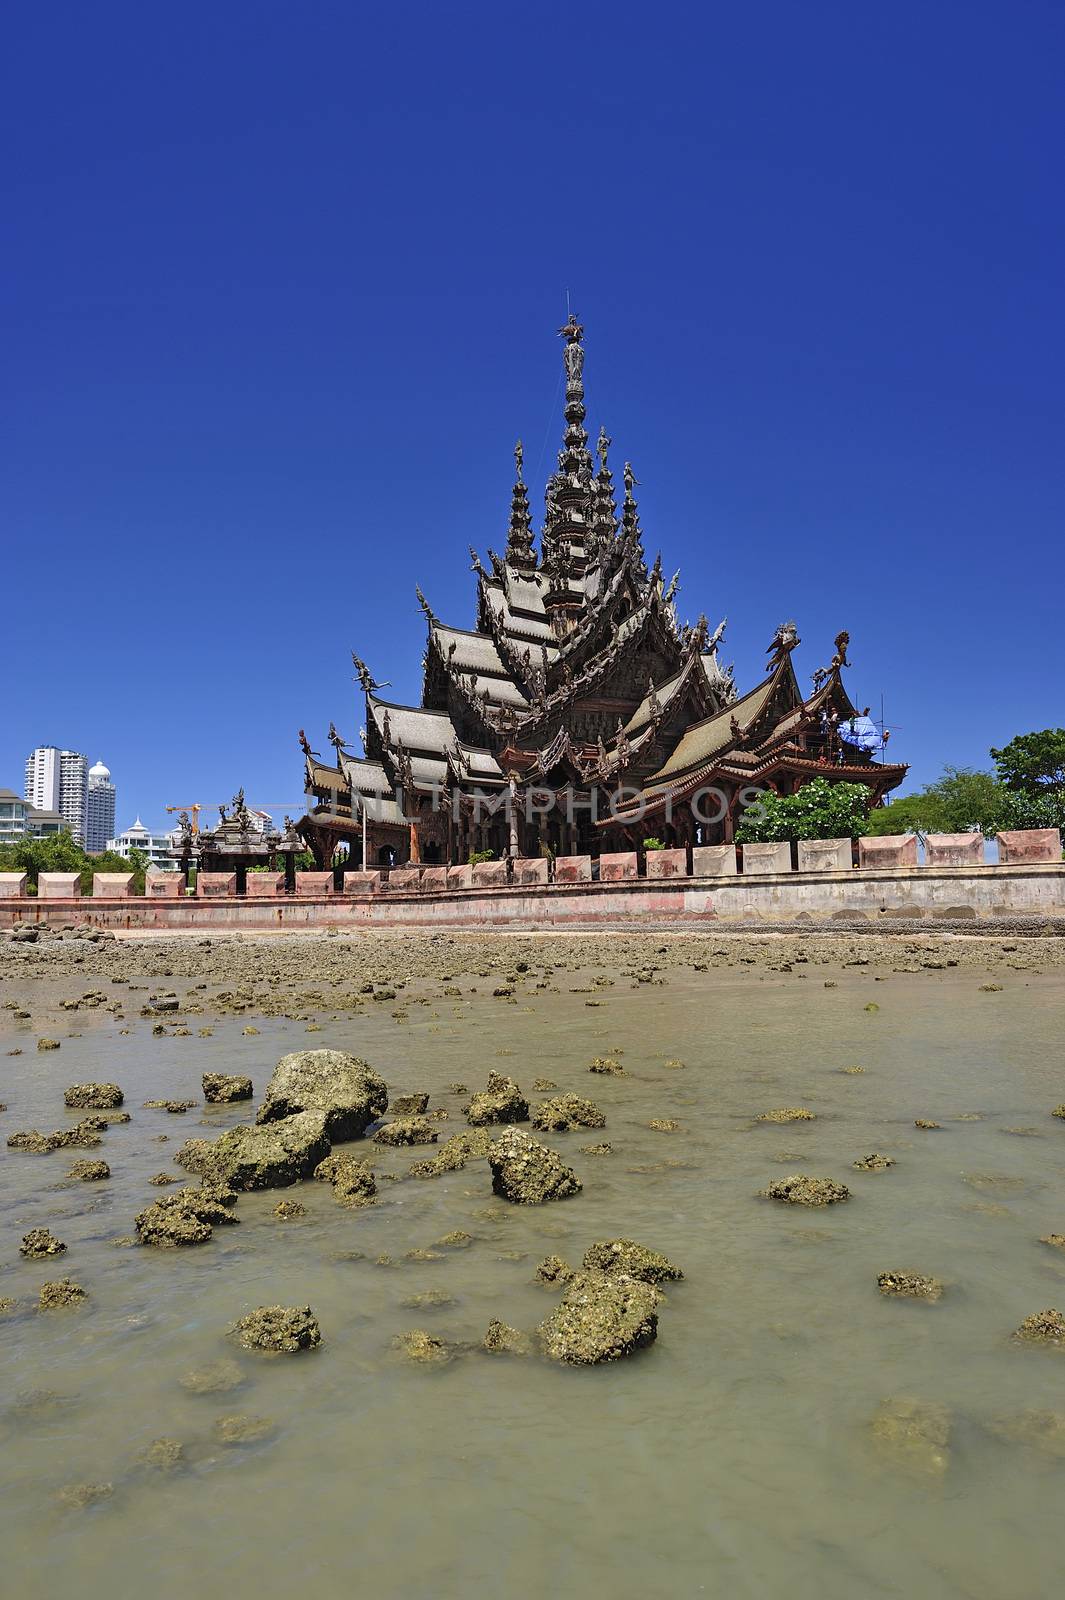 Sanctuary of Truth in Pattaya, Thailand. by think4photop